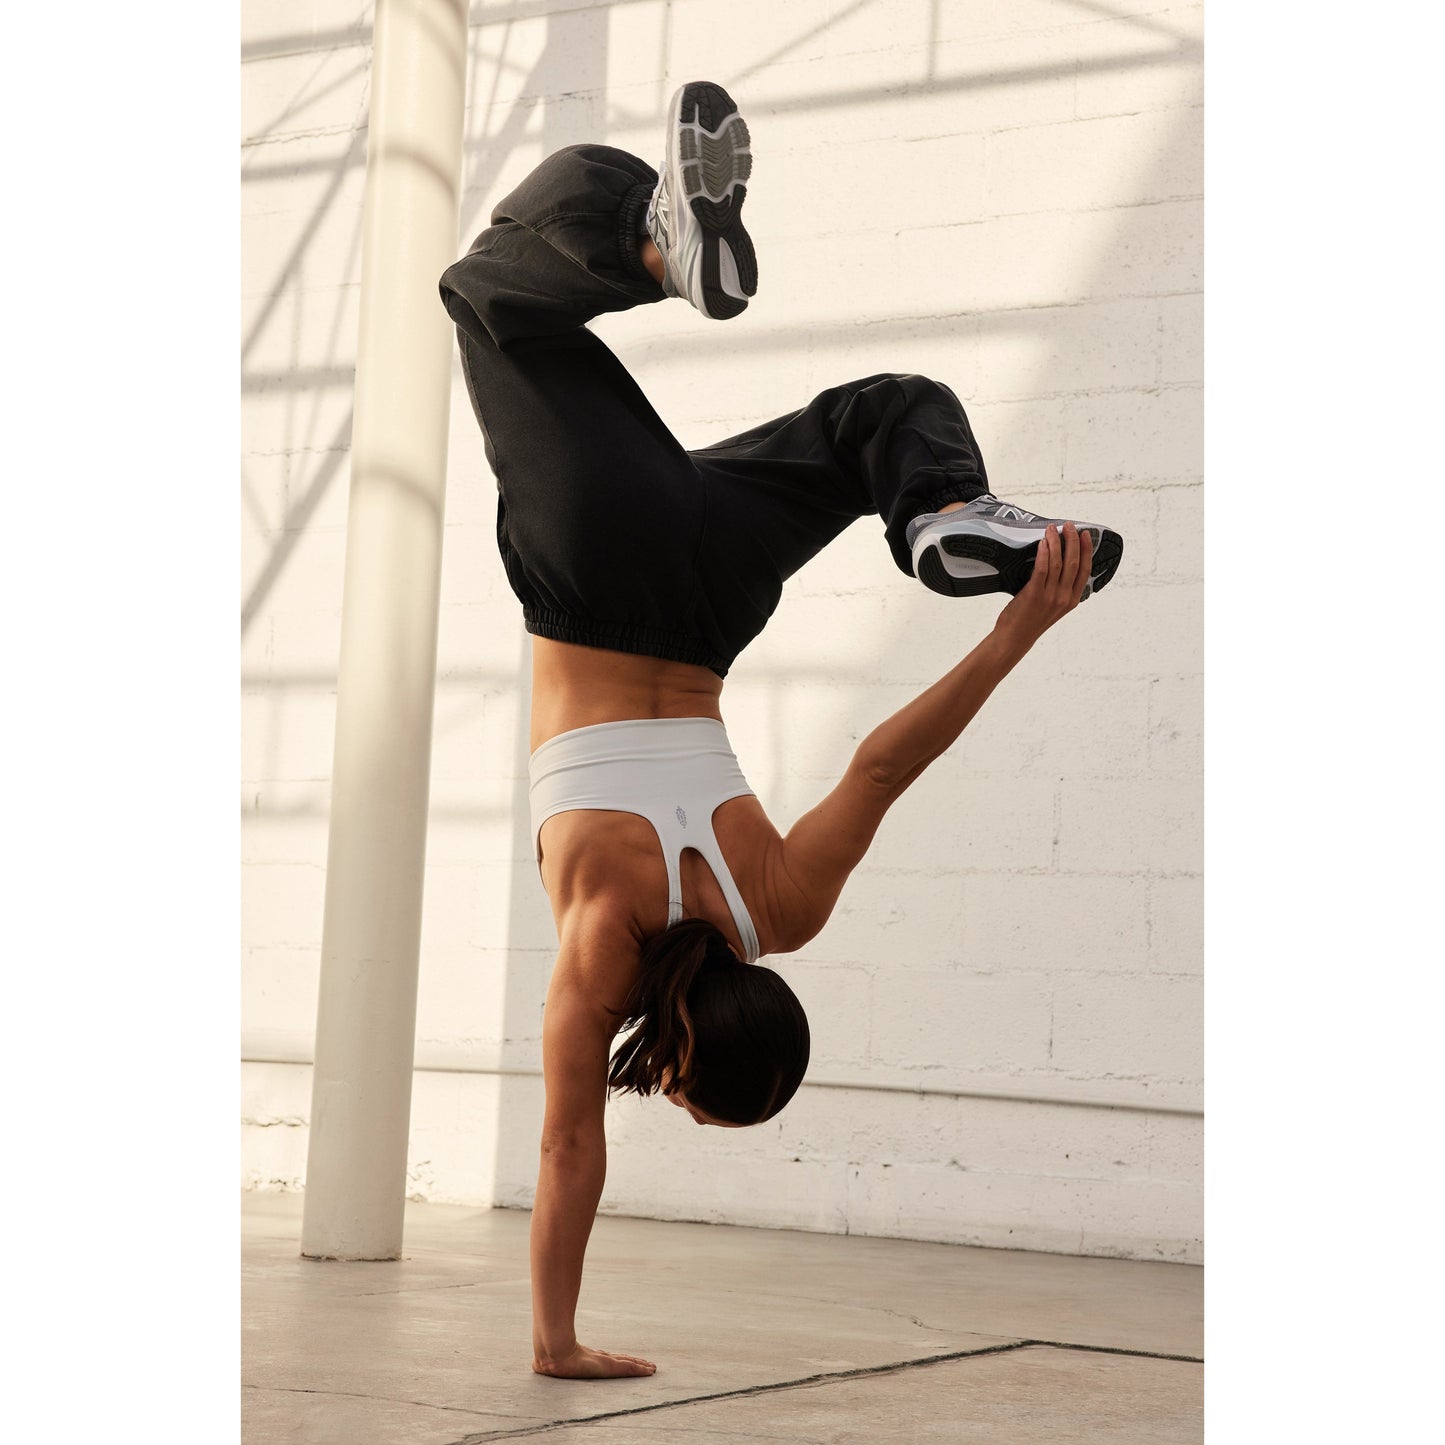 A woman performs a handstand in an urban setting, wearing a white Never Better SQ Neck Bra by Free People Movement, black pants, and sneakers.